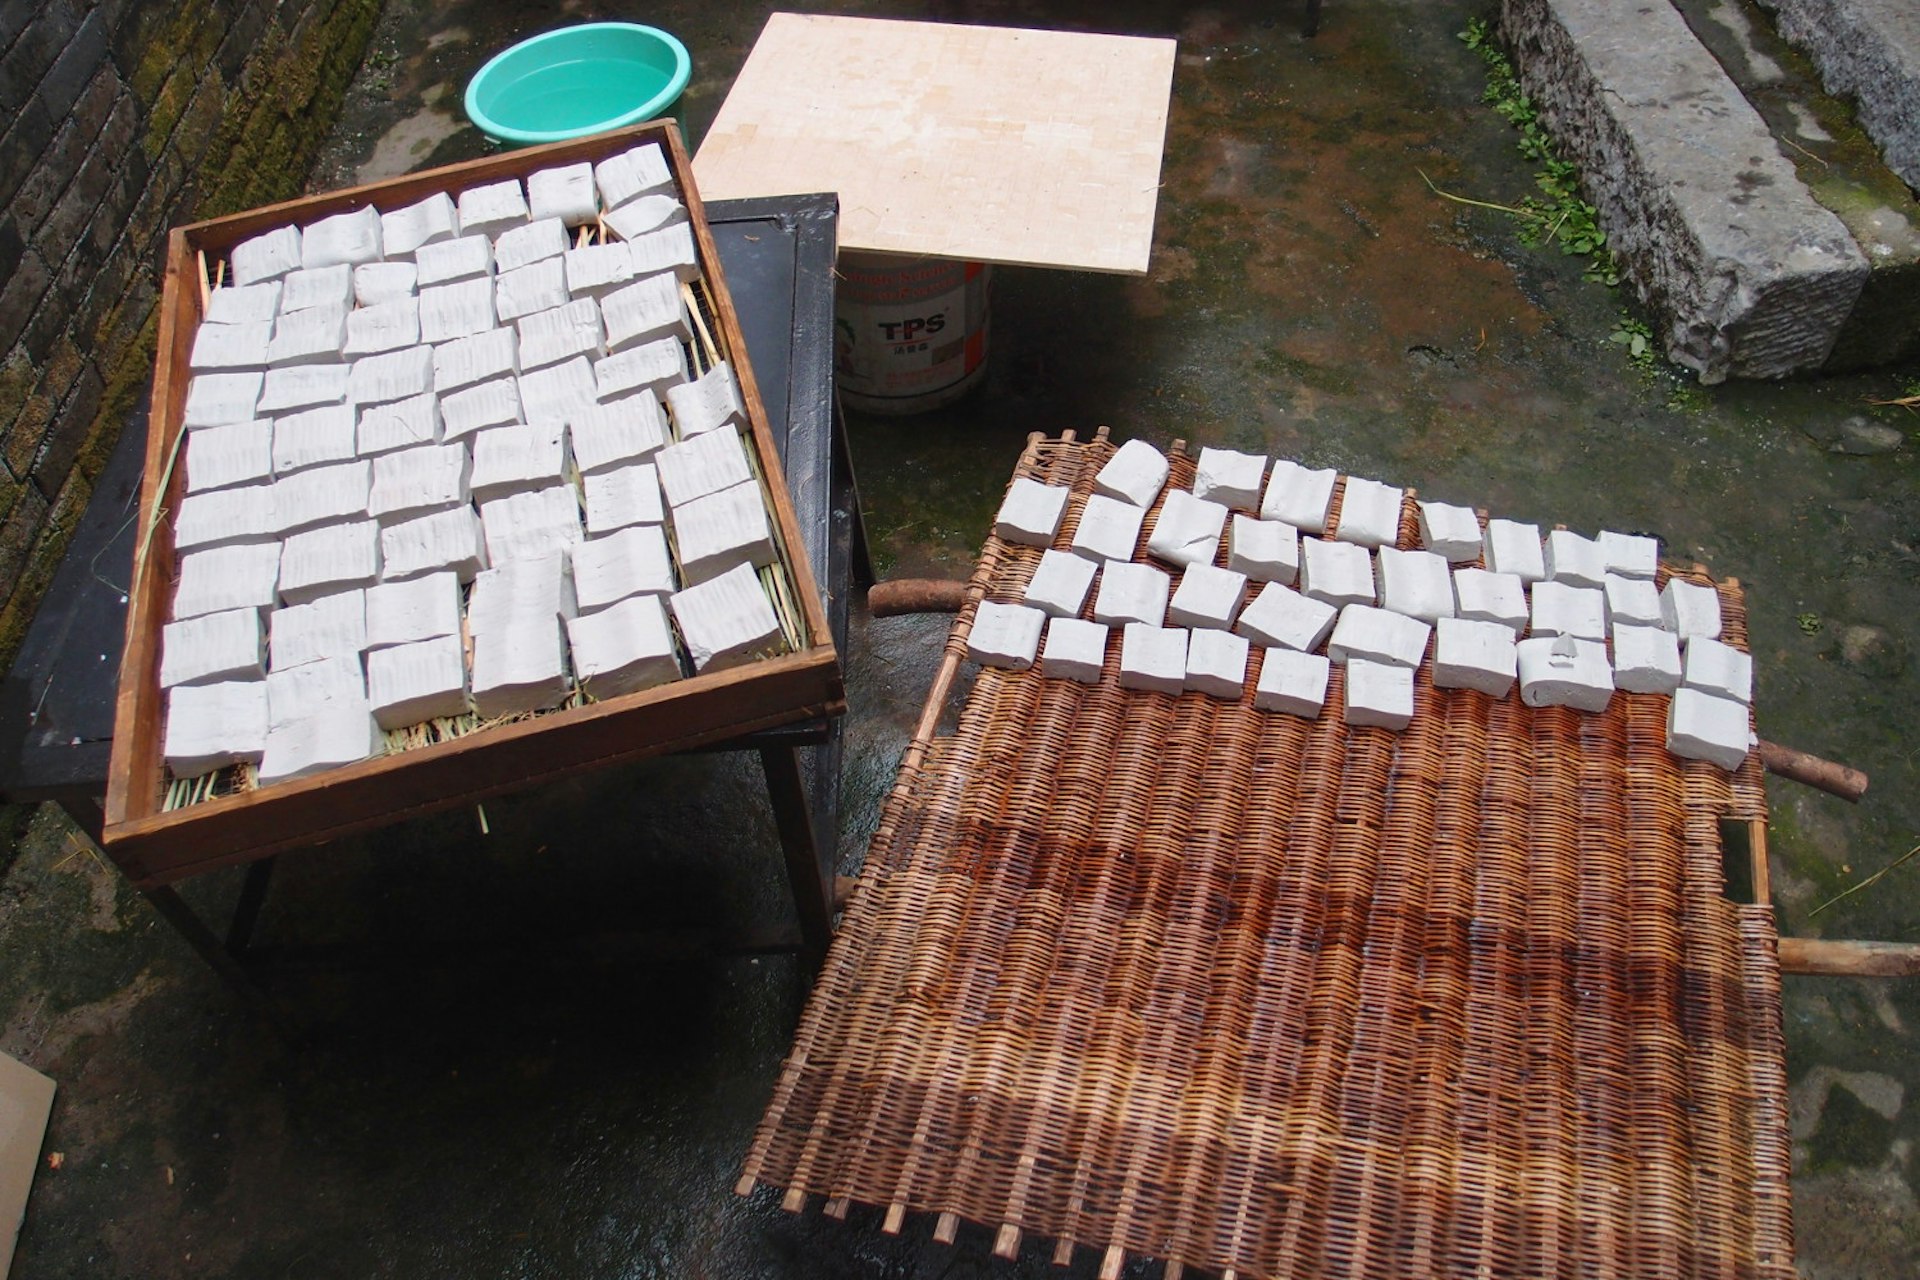 Tofu laid out to set in the courtyard of a Jiangtouzhou home. Image by Piera Chen / Lonely Planet